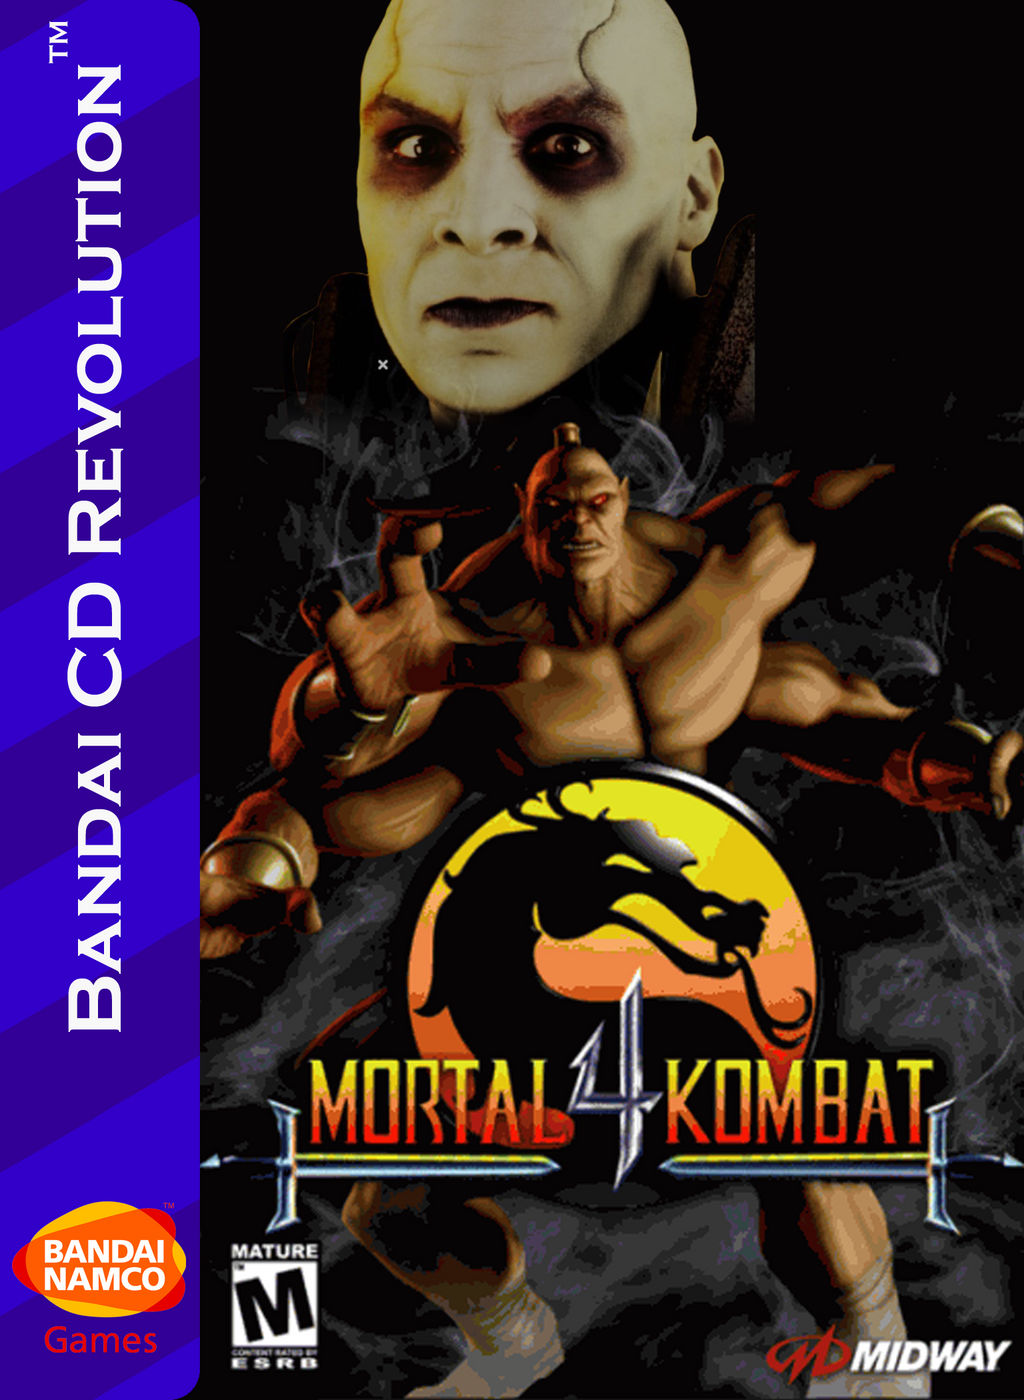 MORTAL KOMBAT 4 #4 comic cover by Arch2626 on DeviantArt